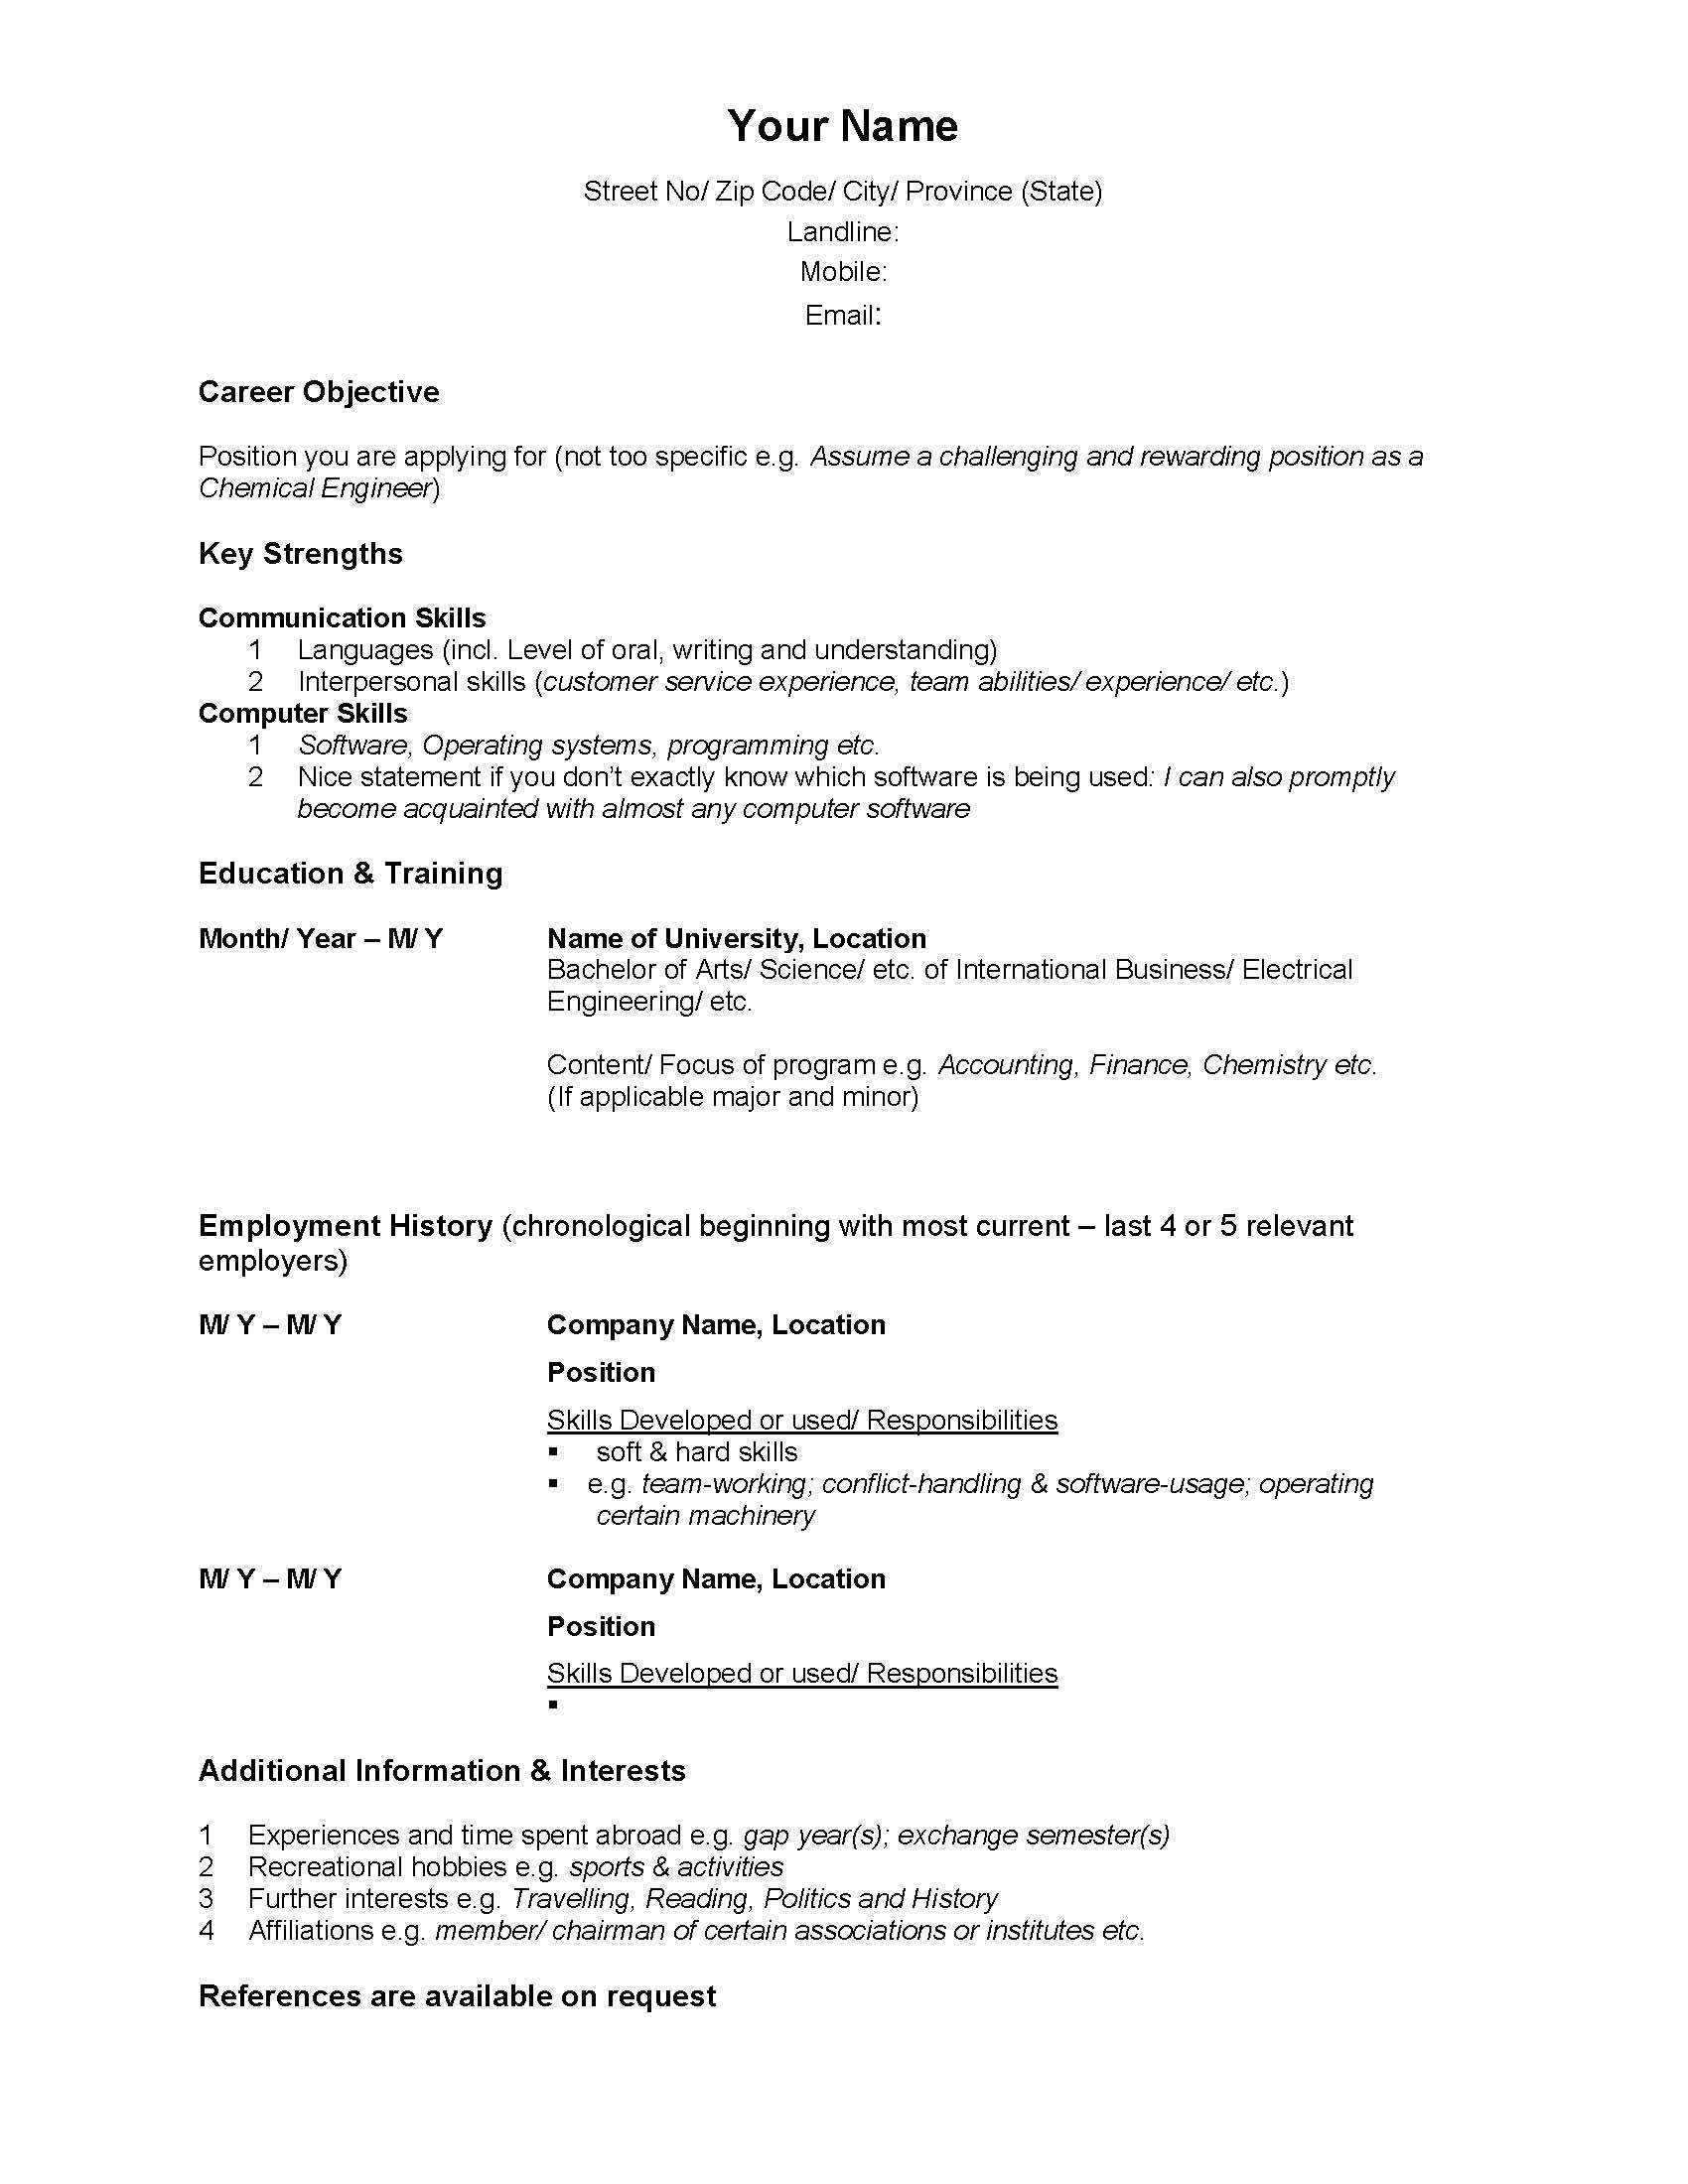 Canadian Resume Format Doc â planner template free